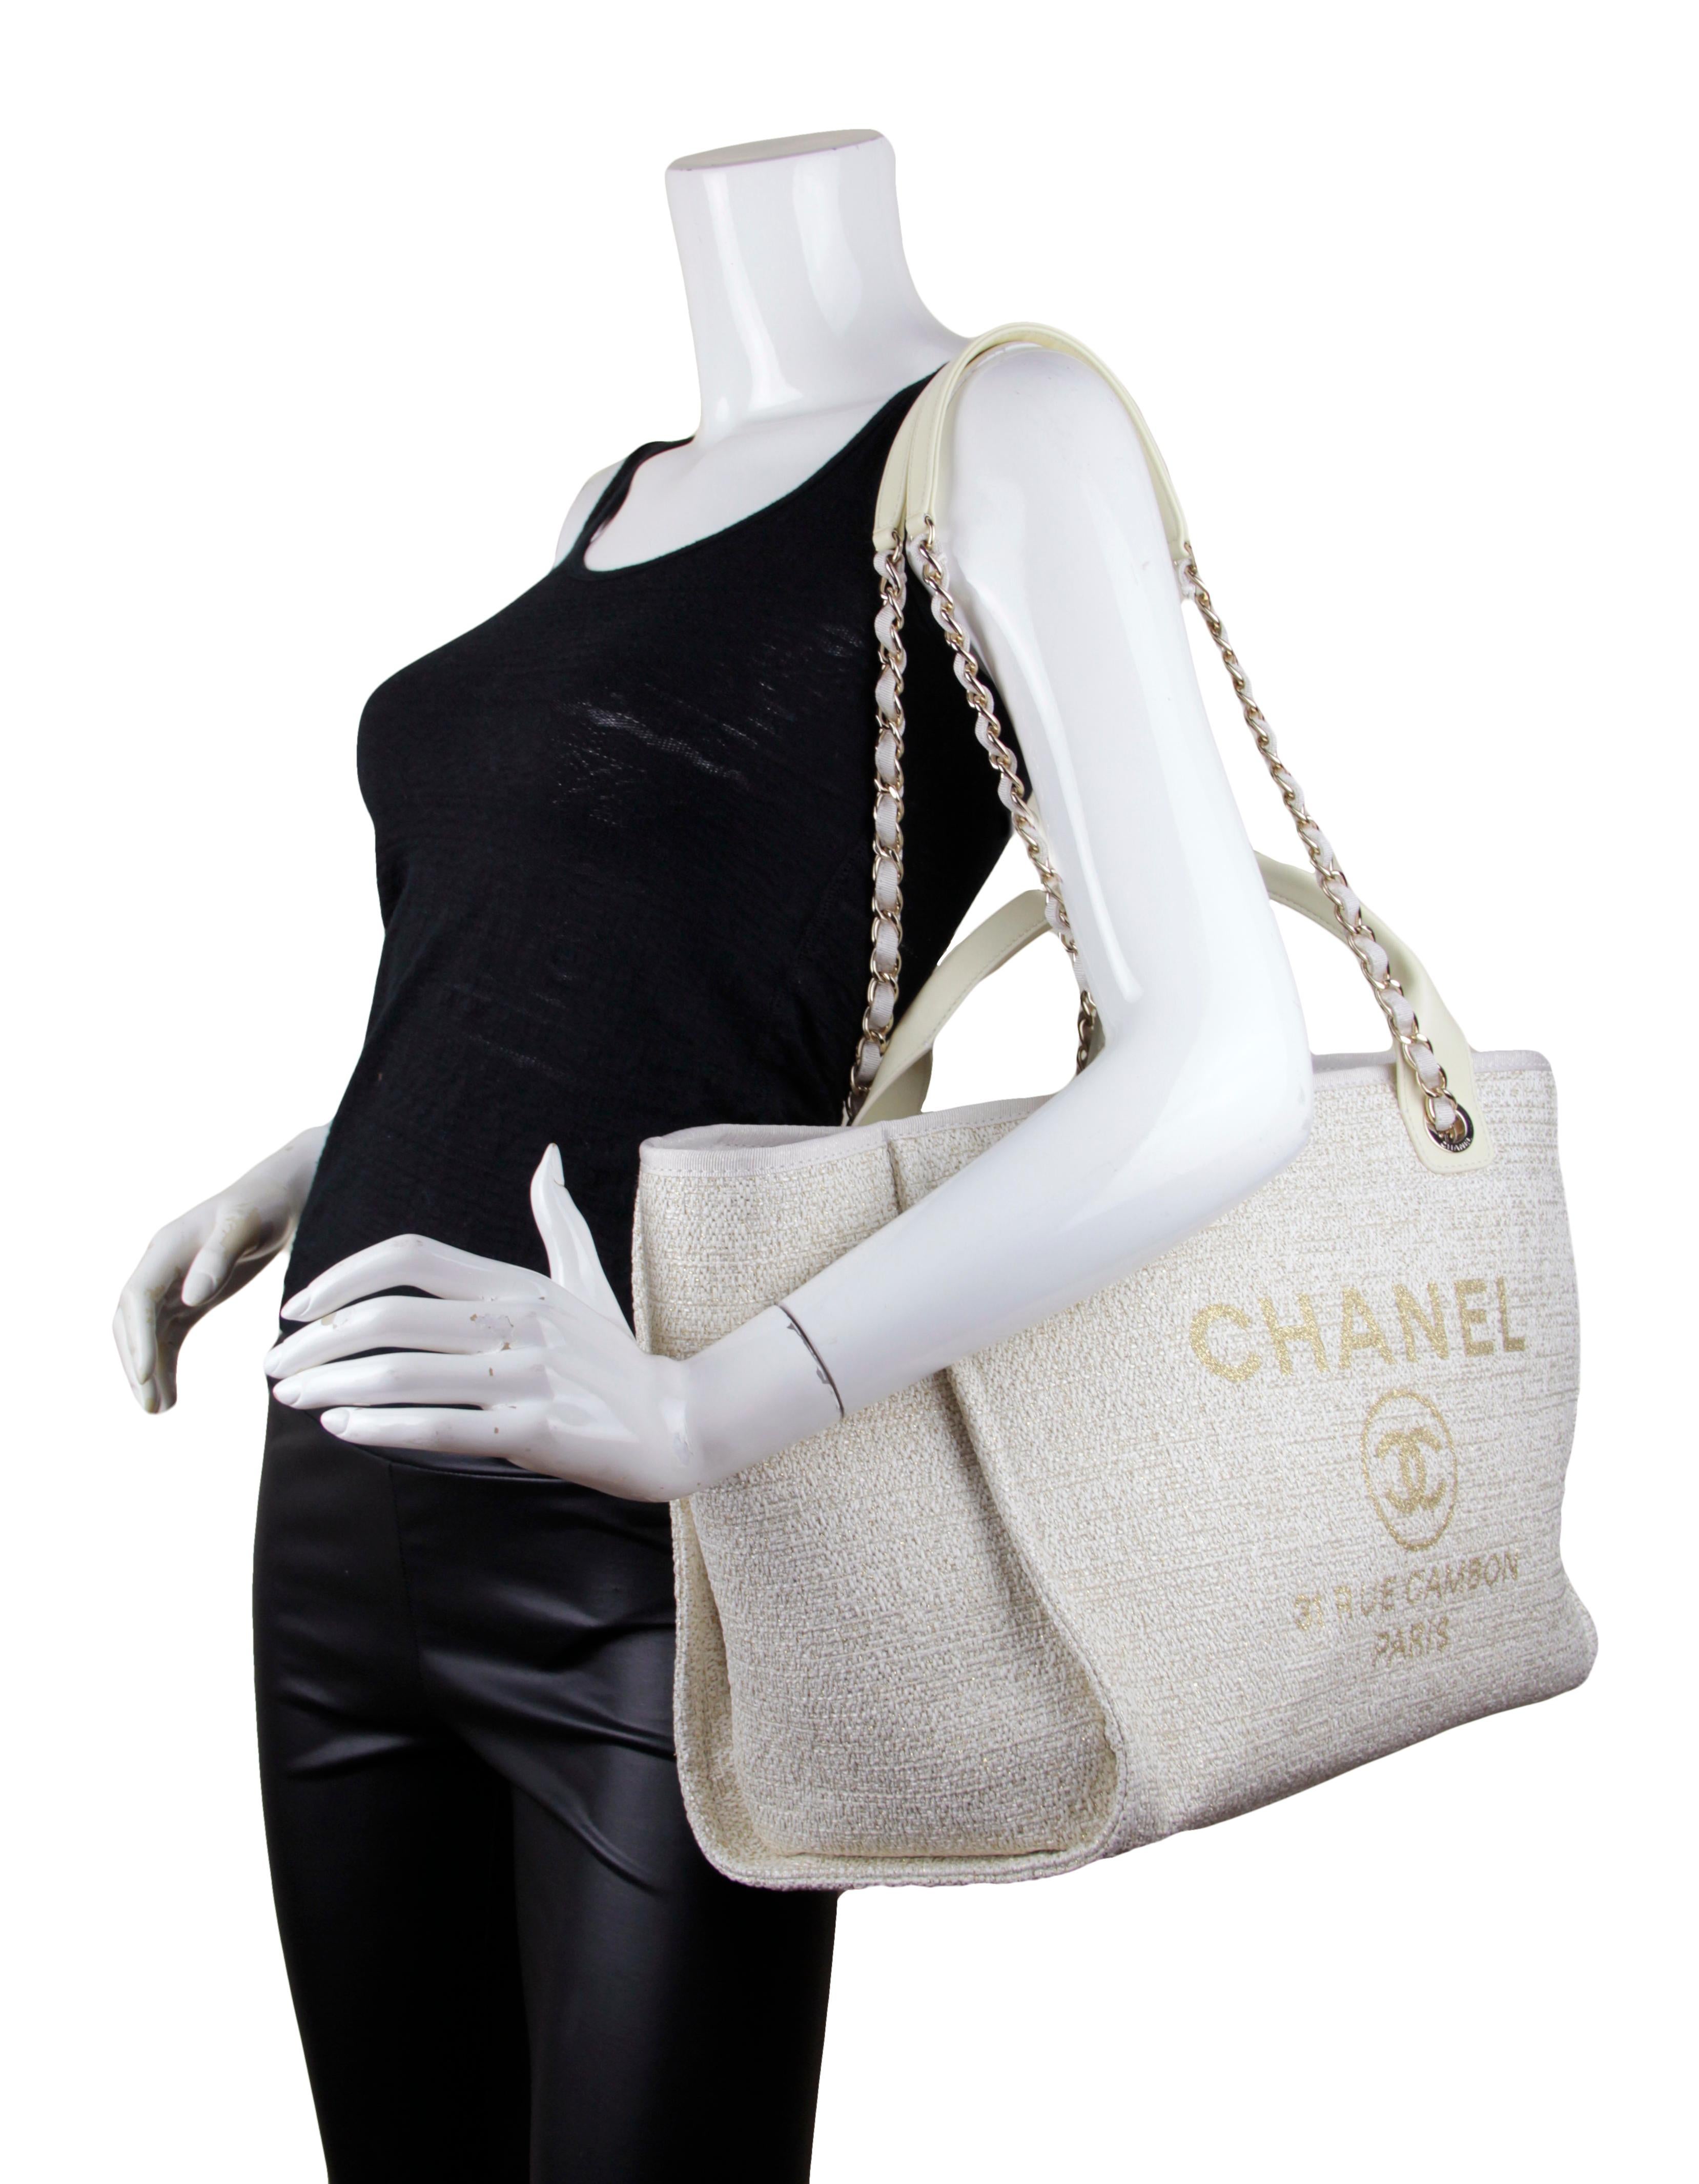 Chanel 2021 Ivory/ Gold Large Deauville Shopping Tote Bag

Made In: Italy
Year of Production: 2021
Color: Ivory and gold
Hardware: Pale goldtone
Materials: Woven canvas, leather
Lining: Beige canvas
Closure/Opening: Open top with center magnetic